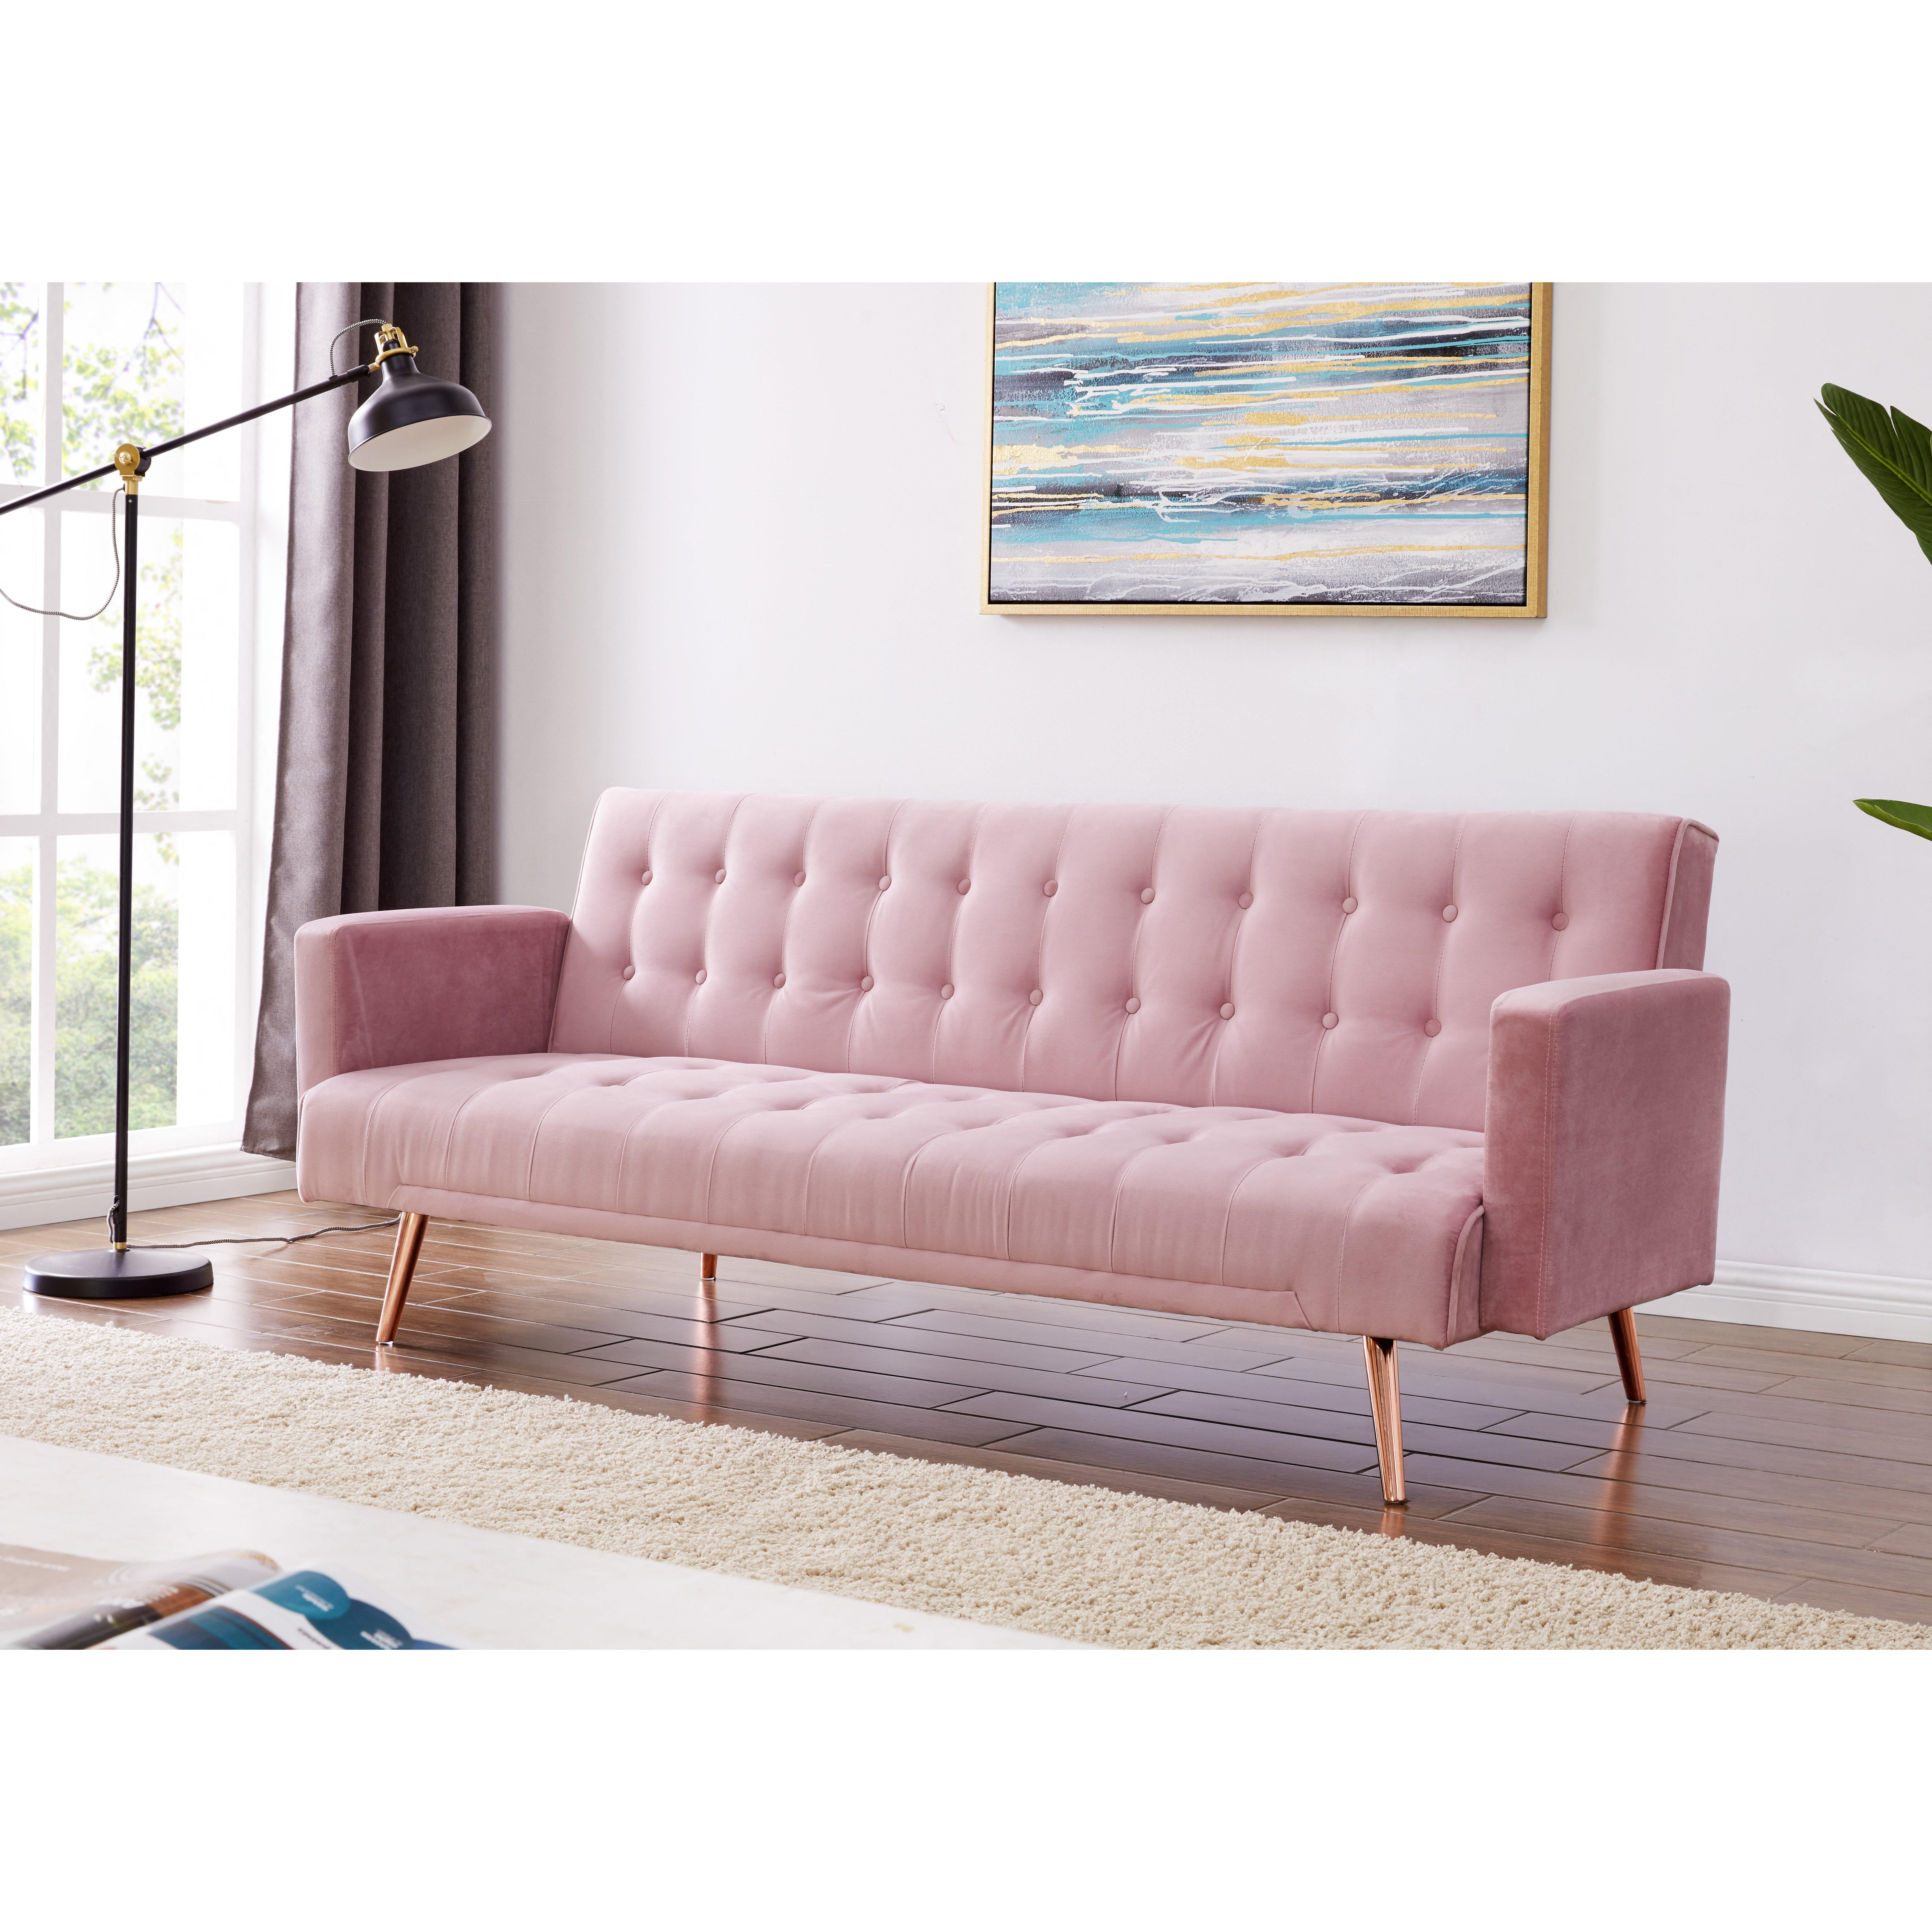 Windsor Velvet Sofa Bed With Tufted Detail and Rose Gold Legs - image 1